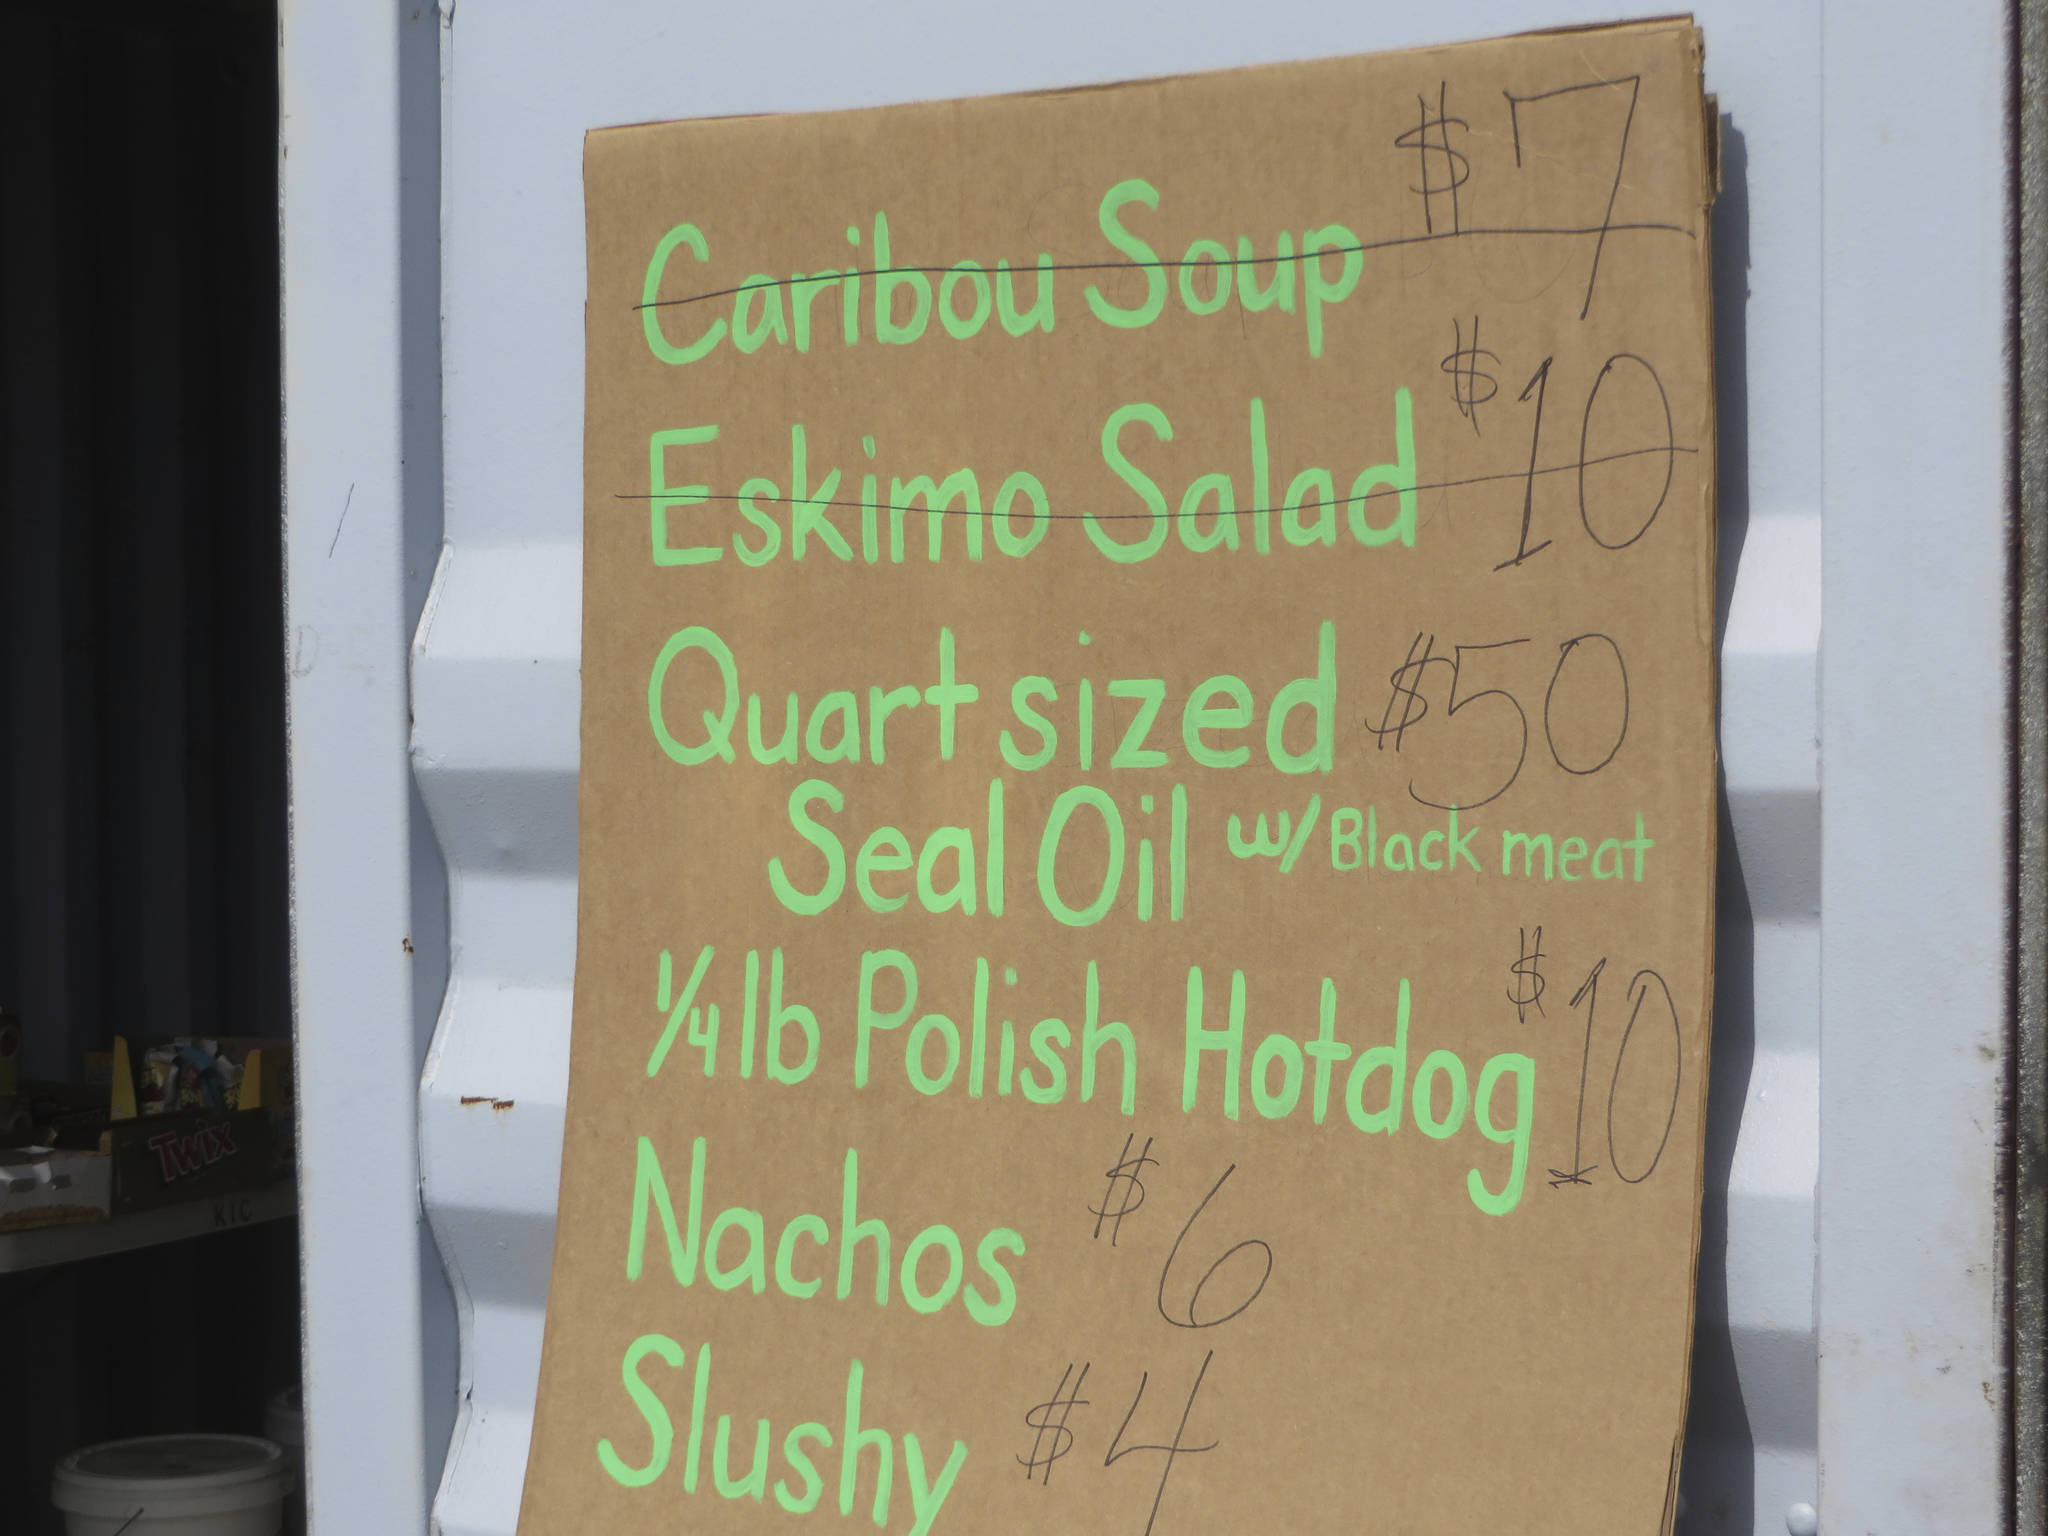 This July 4, 2014, photo provided by Val Kreil shows a restaurant menu of food for sale, including Caribou soup, Eskimo Salad and Seal Oil at the community fairgrounds in Kotzebue, Alaska. The Maniilaq Health Association in the Chukchi Sea community of Kotzebue has received state approval to process and serve seal oil at its elder care facility in Kotzebue, believed to be a first for seal oil in the U.S. (Val Kreil via AP)